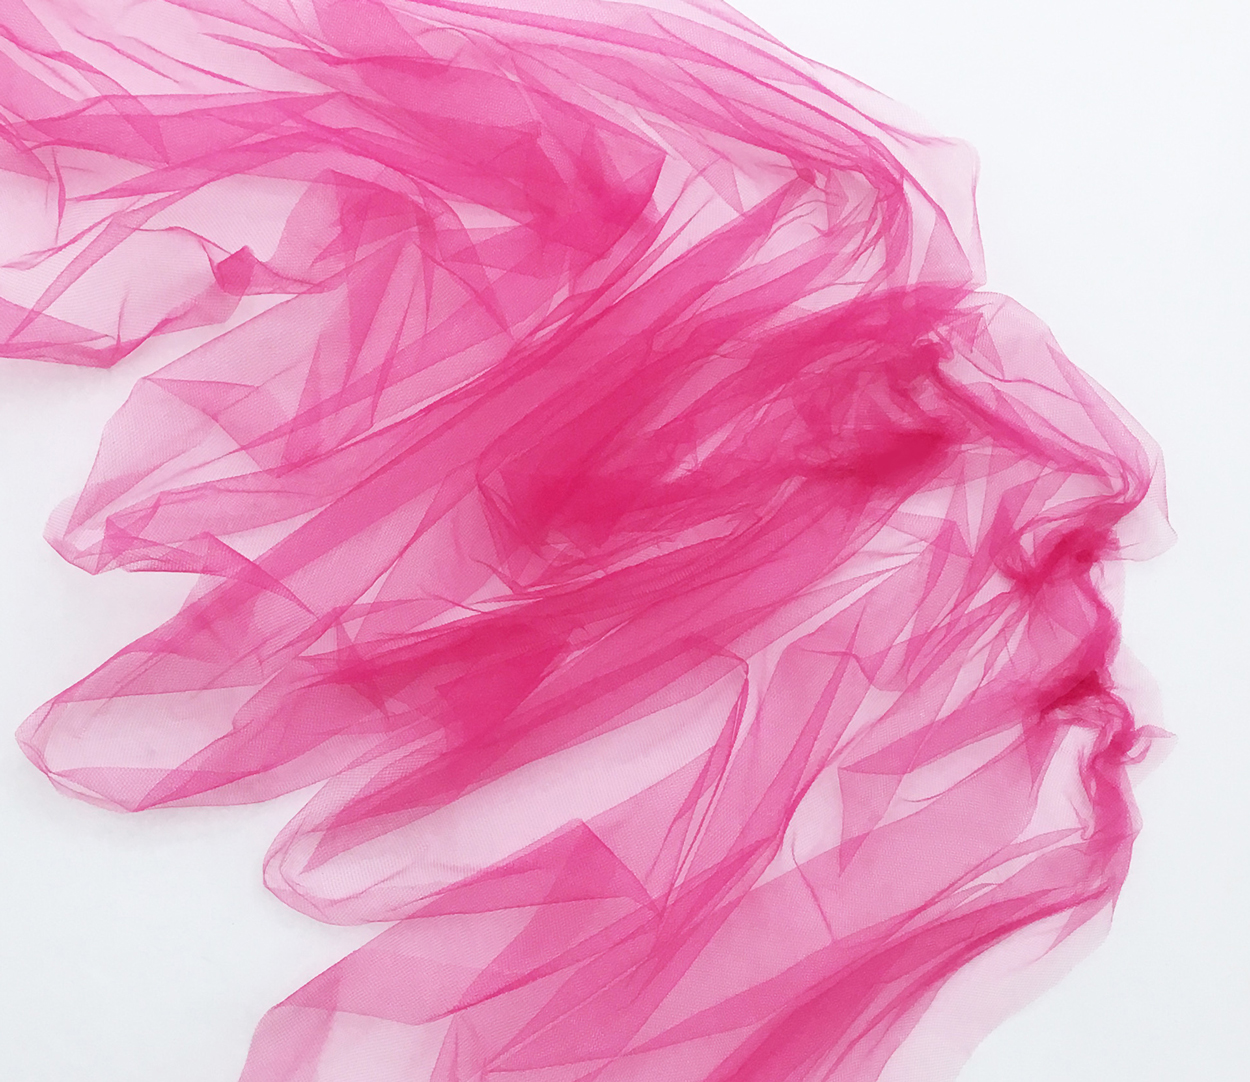 Benjamin Shine Sculpts Feminine Faces Out of Tulle – SURFACE